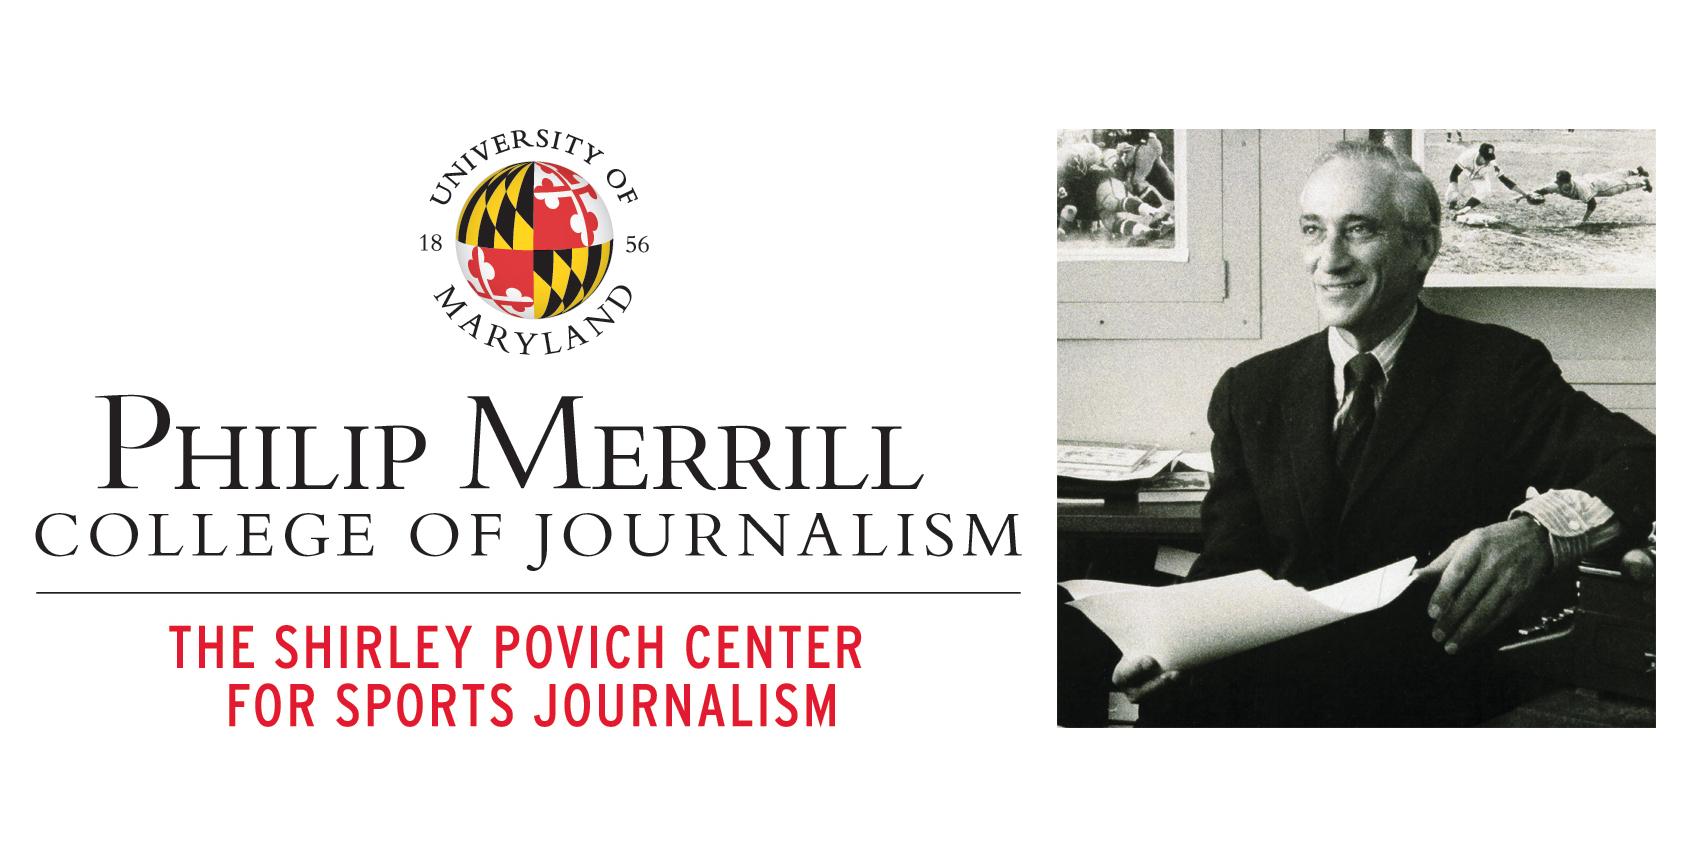 The Shirley Povich Center for Sports Journalism